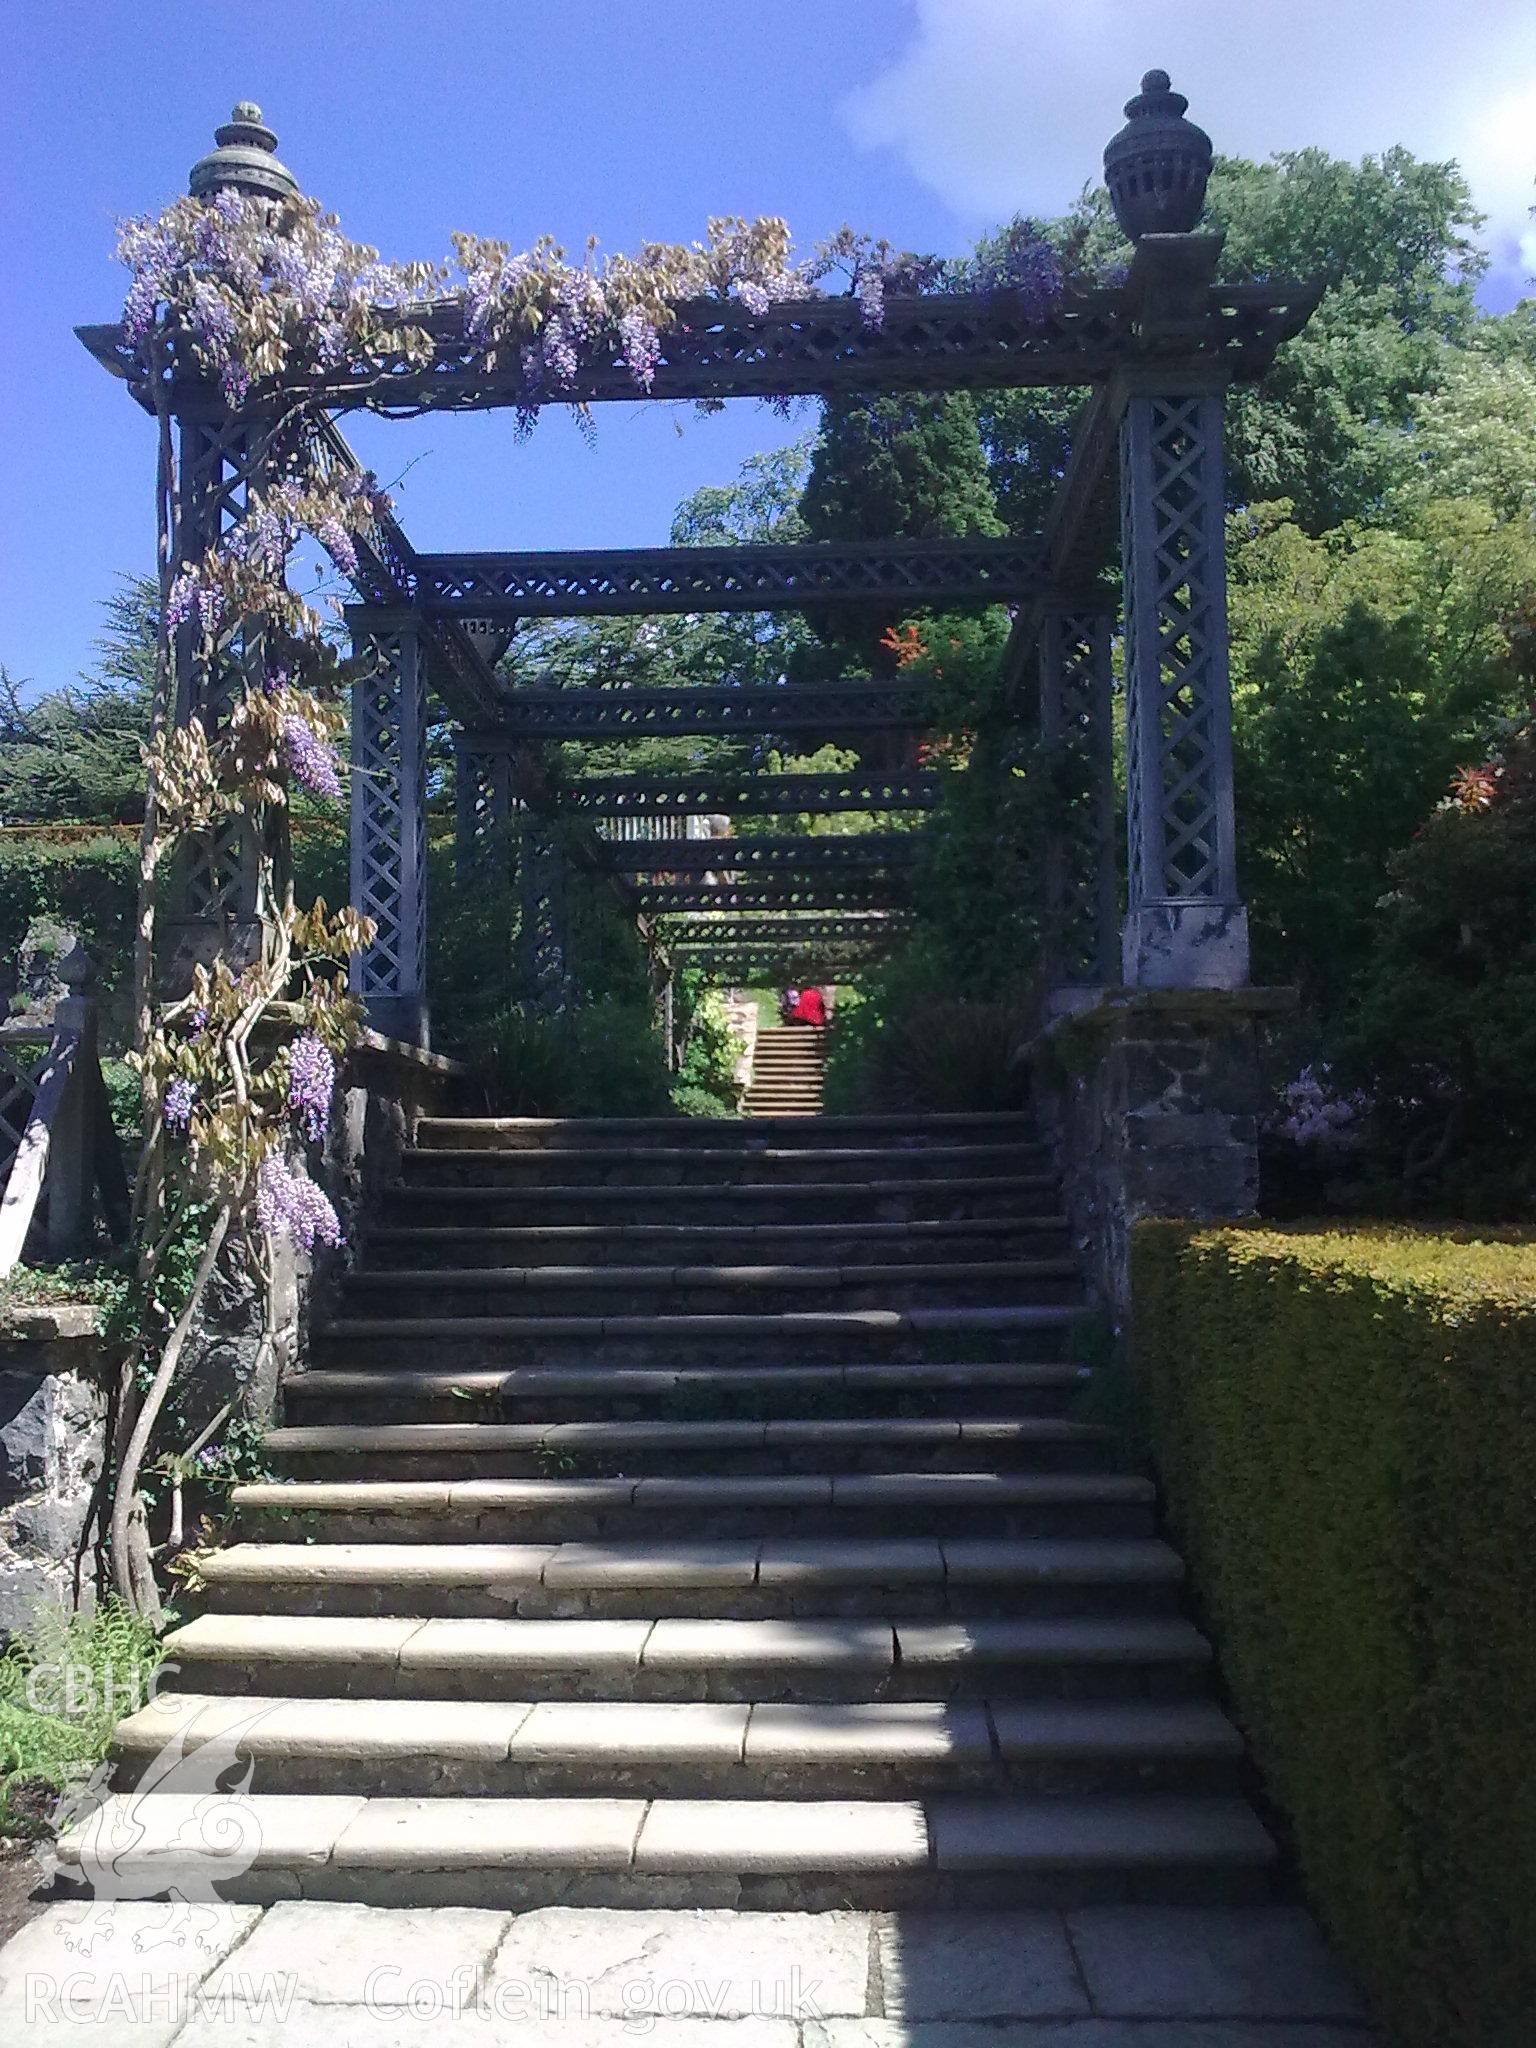 Wisteria growing over wooden trellis arcade (Pin Mill Terrace)